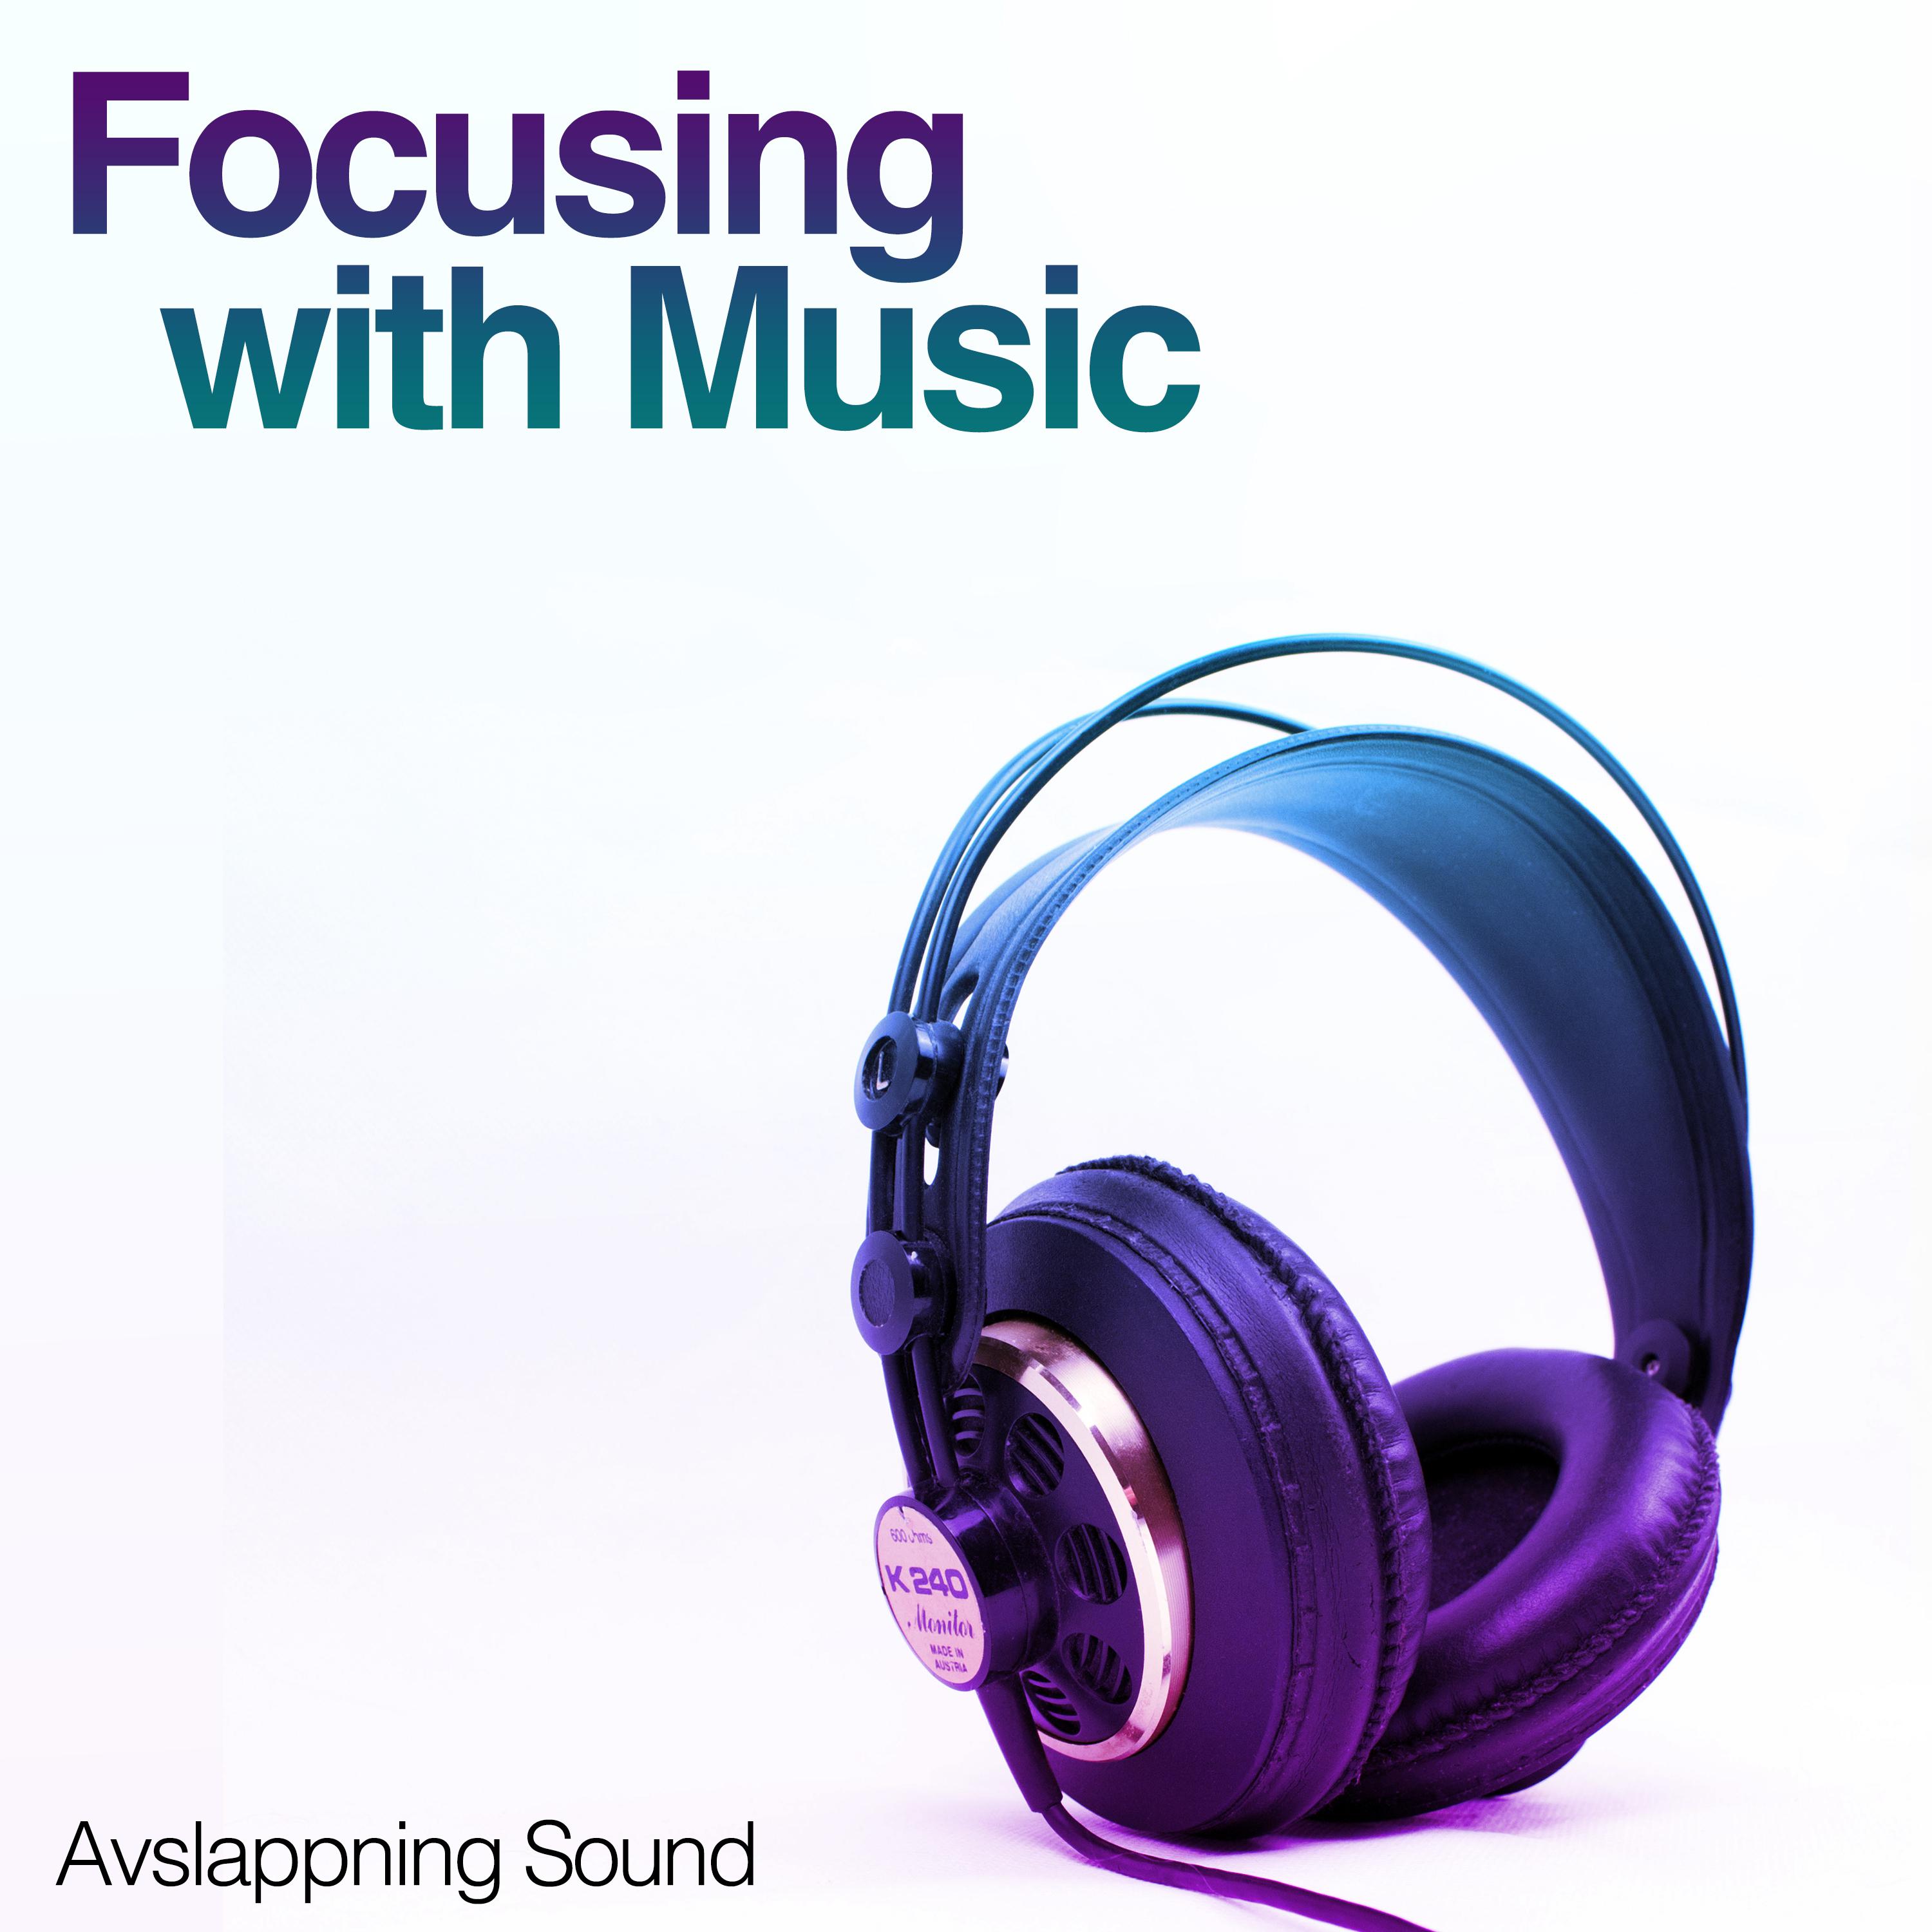 Focusing with Music